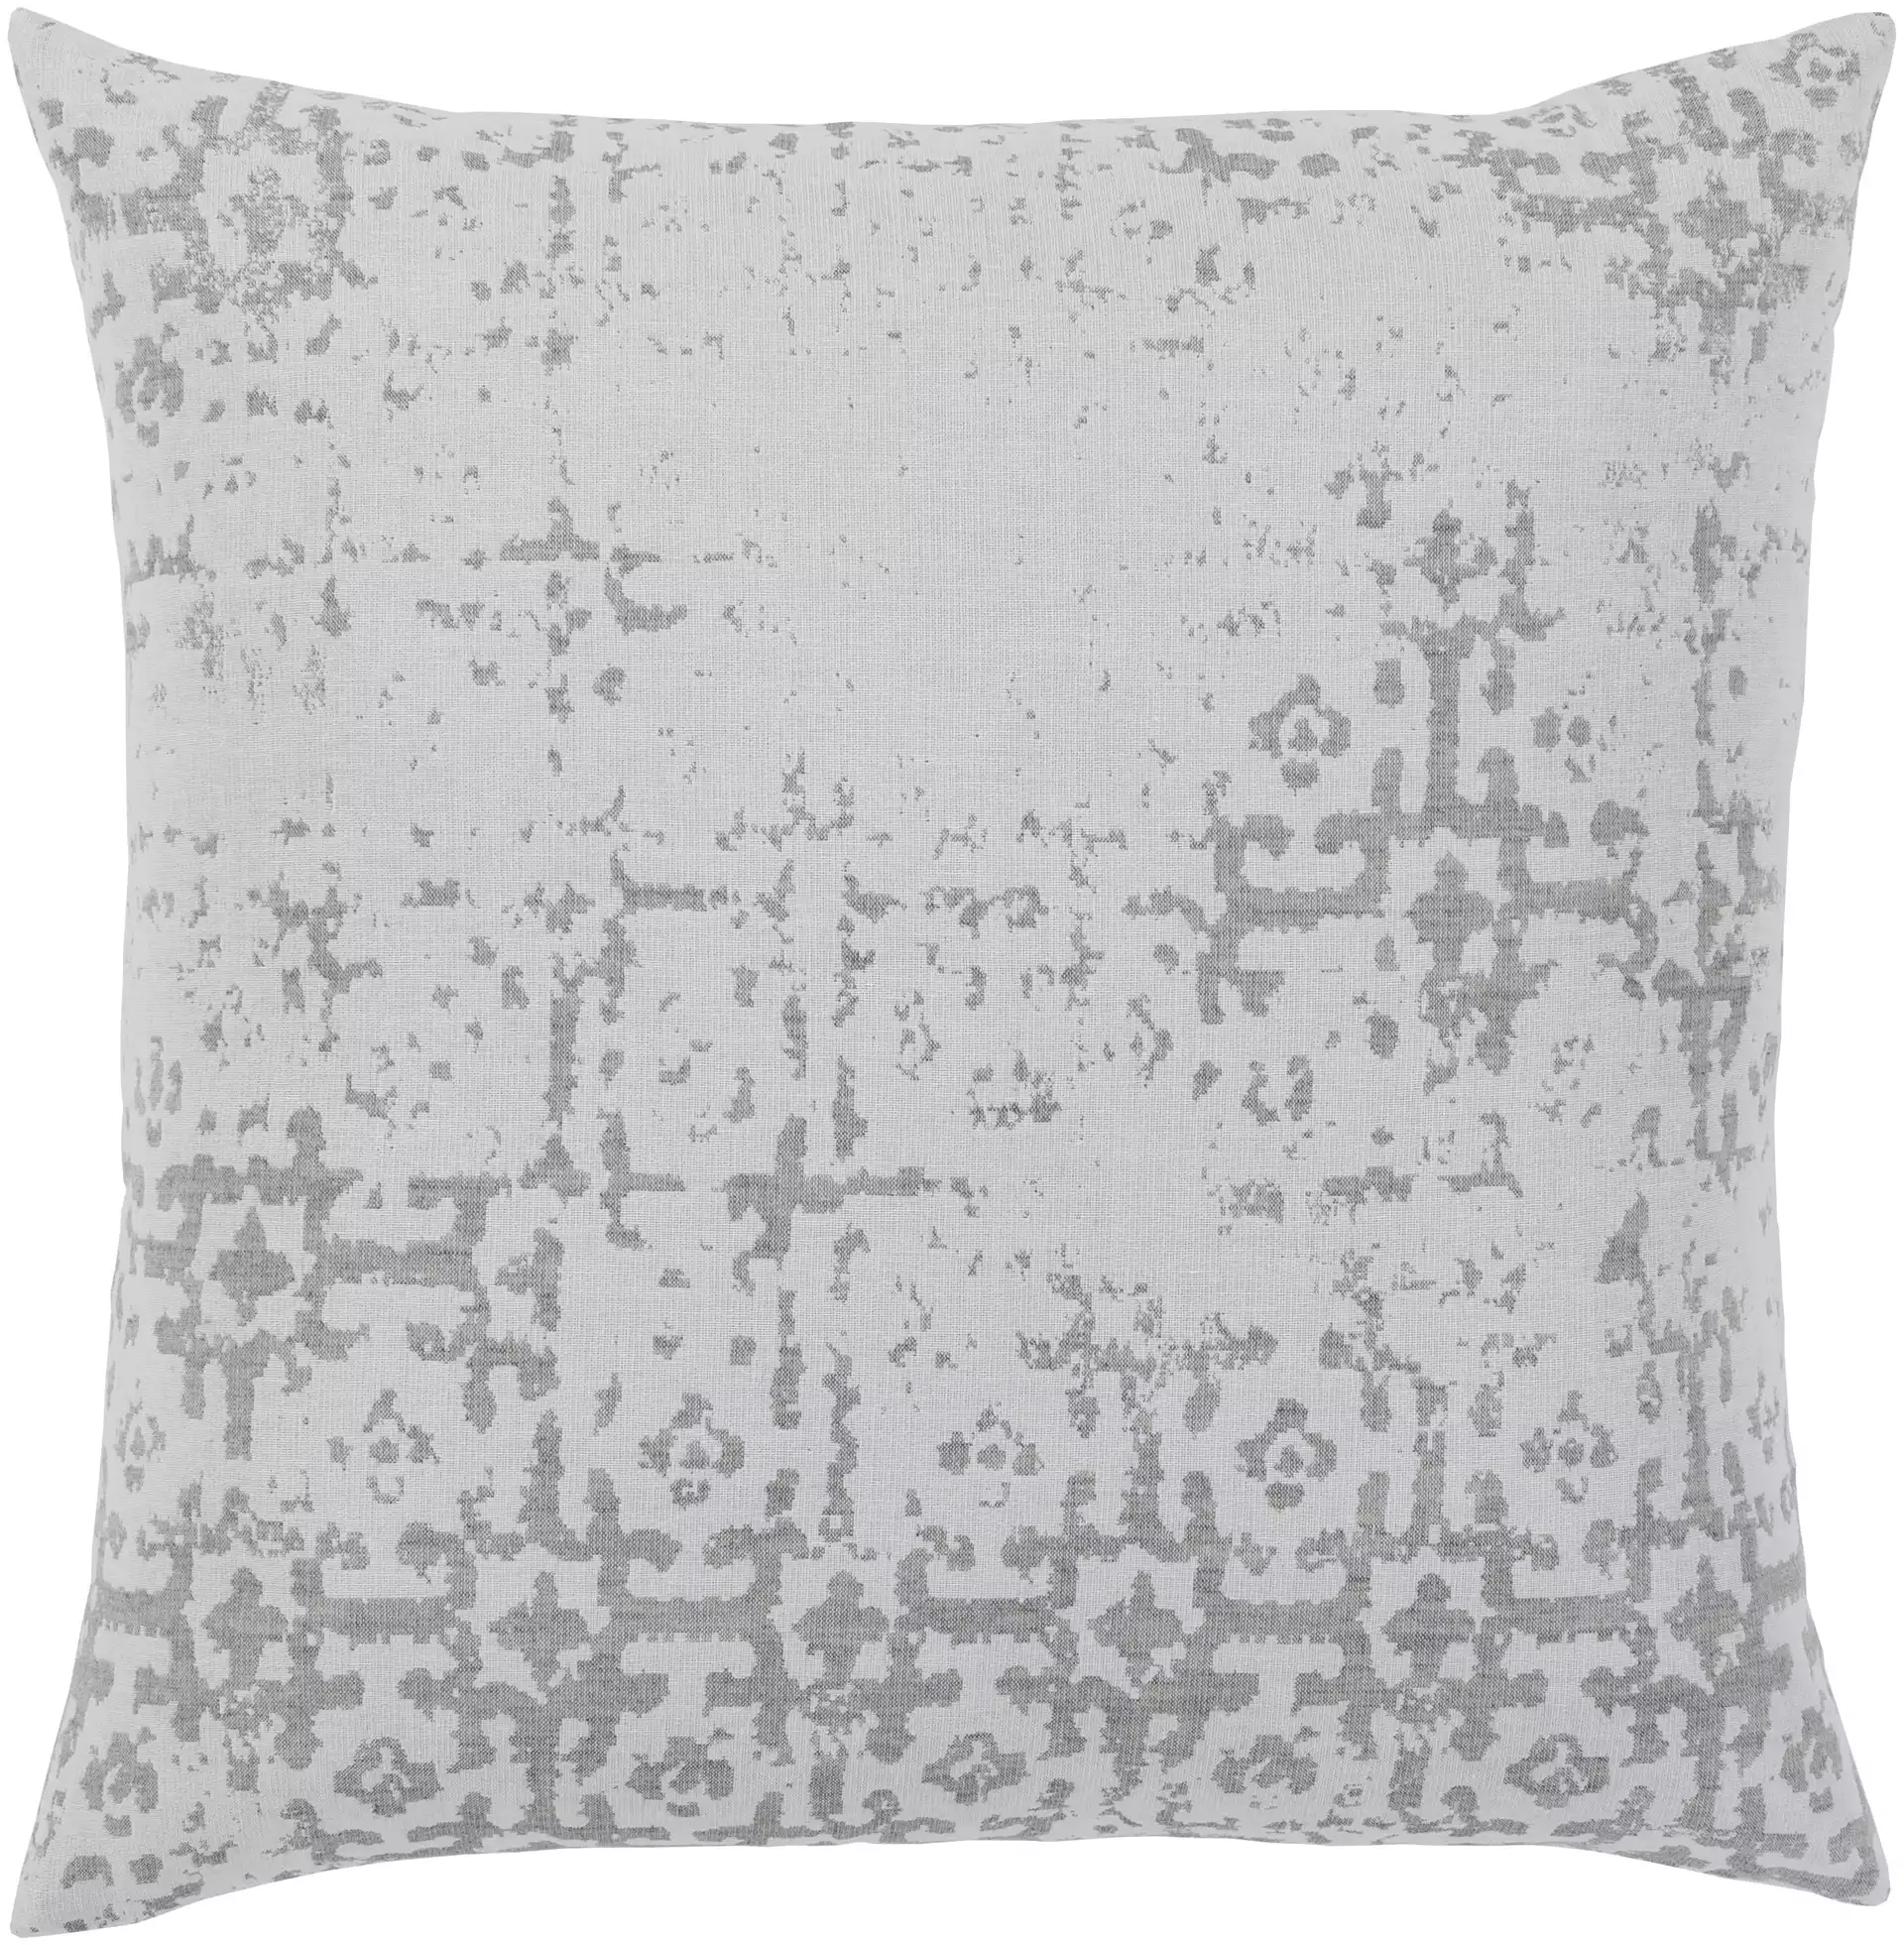 Abstraction - ASR-001 - 18" x 18" - pillow cover only